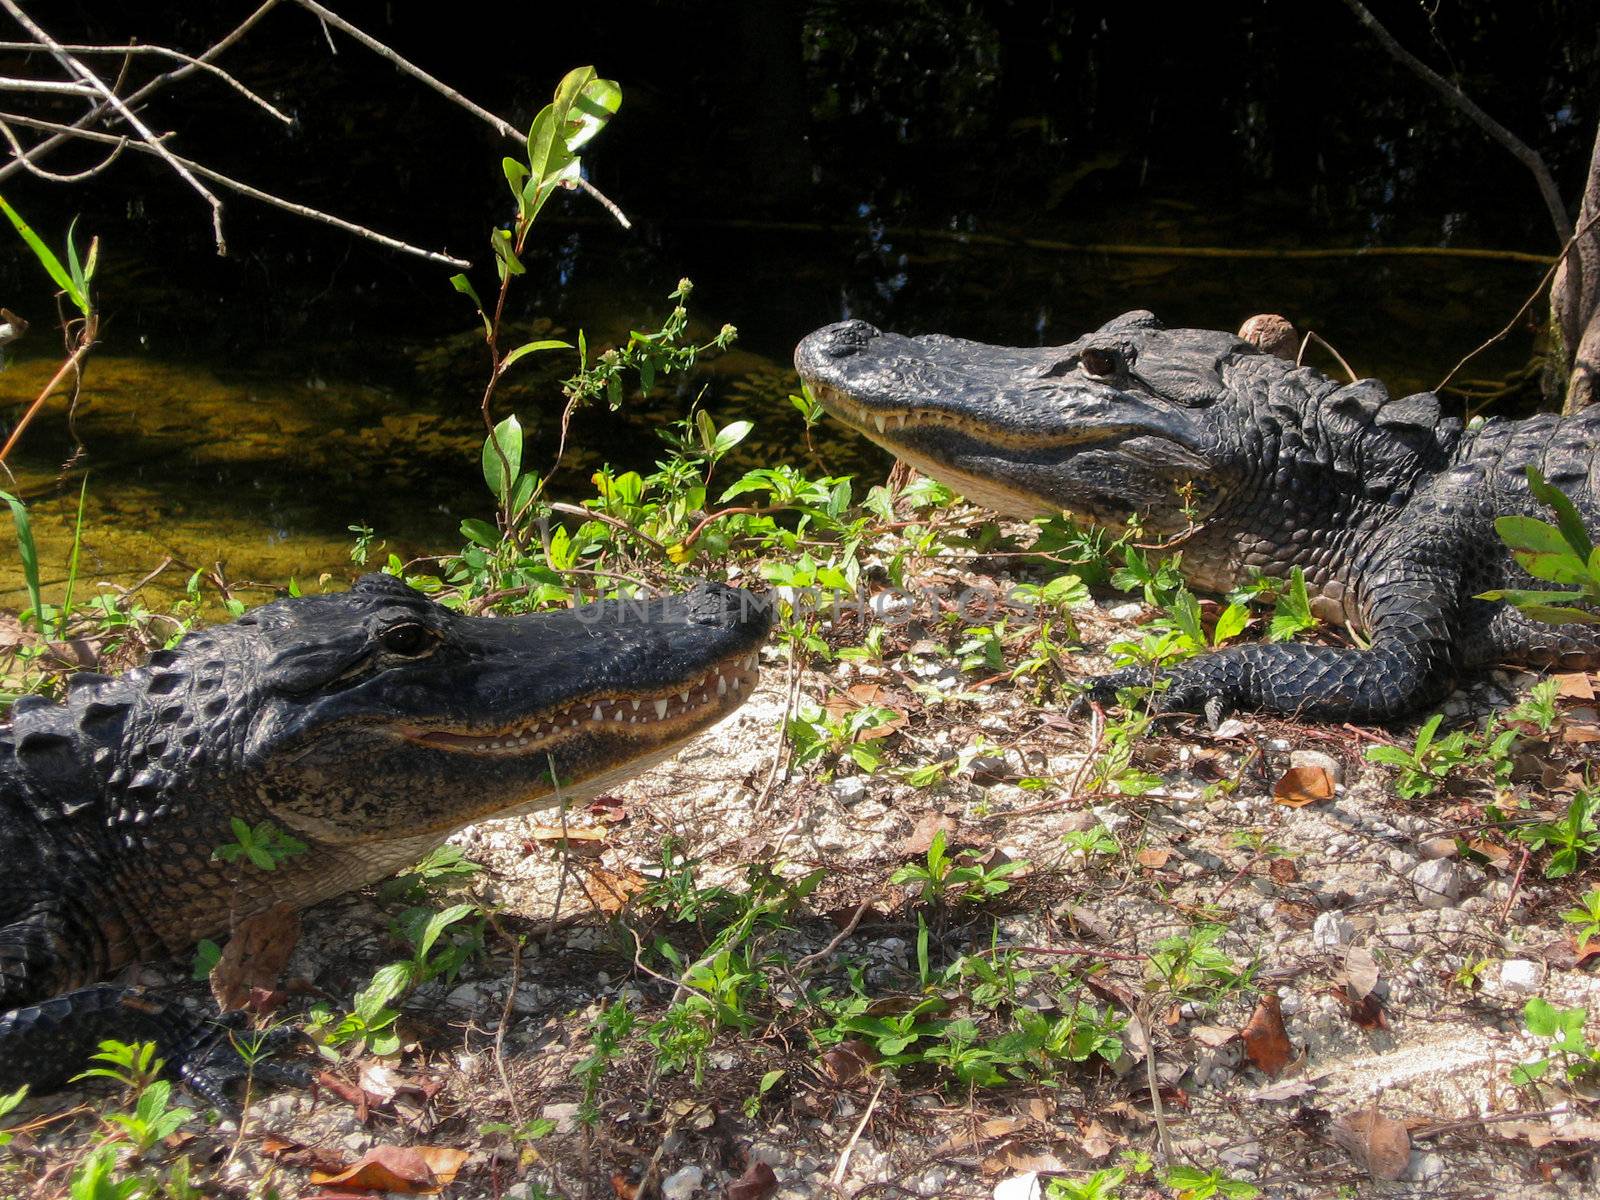 Pair of alligaters resting in sun, Everglades National Park, USA.